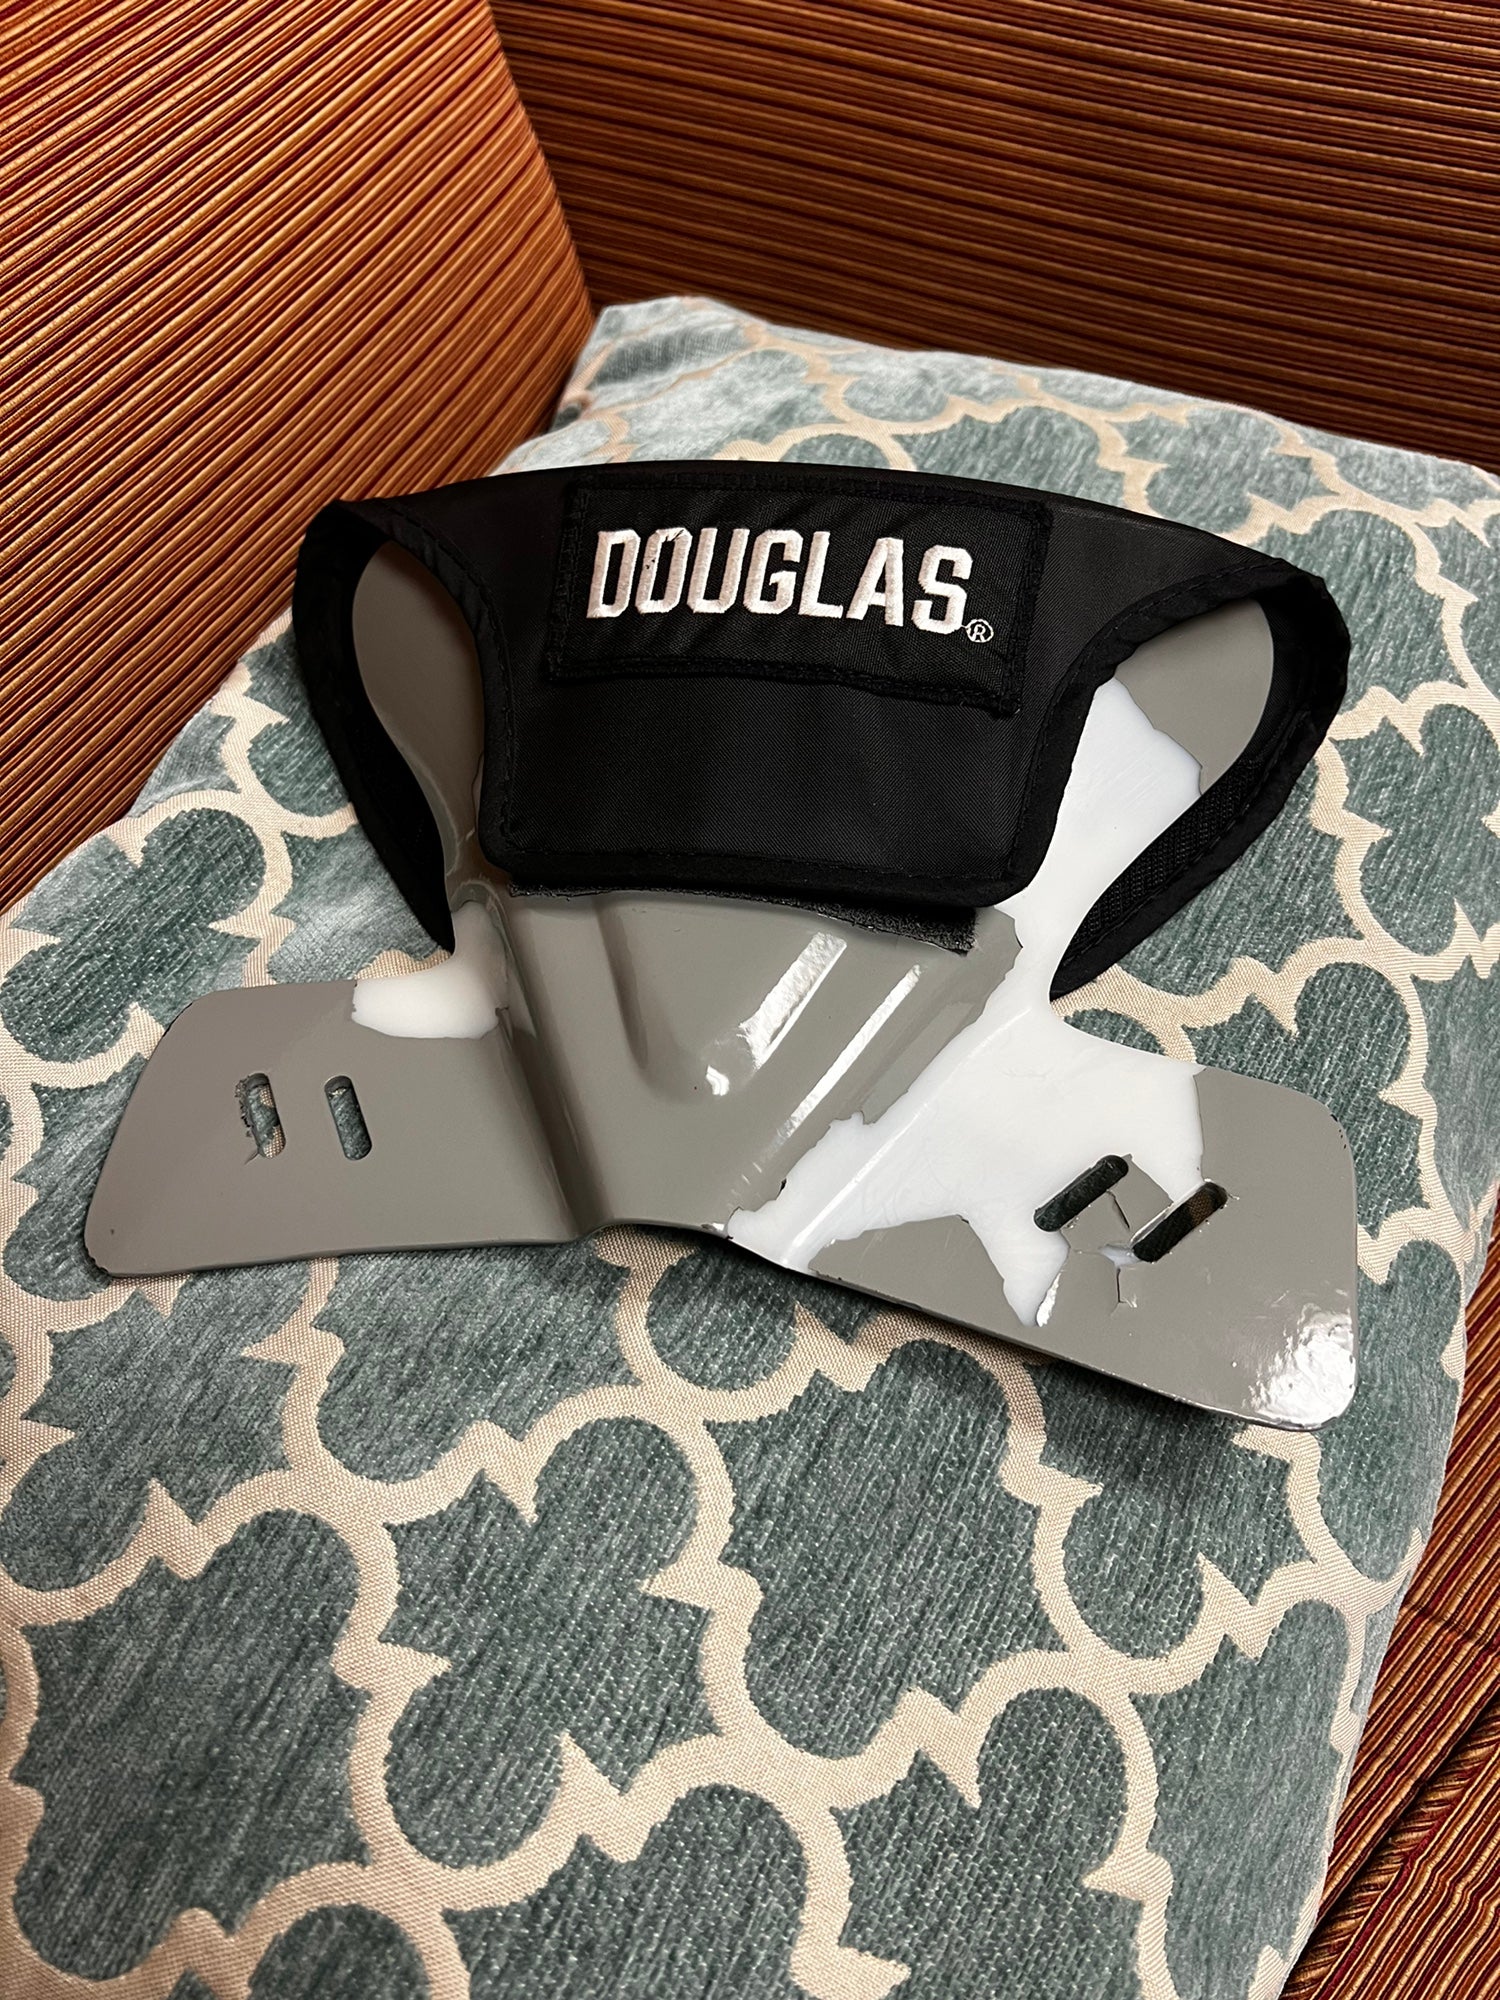 USED Douglas Butterfly Restrictor - Black Pad (Adult)